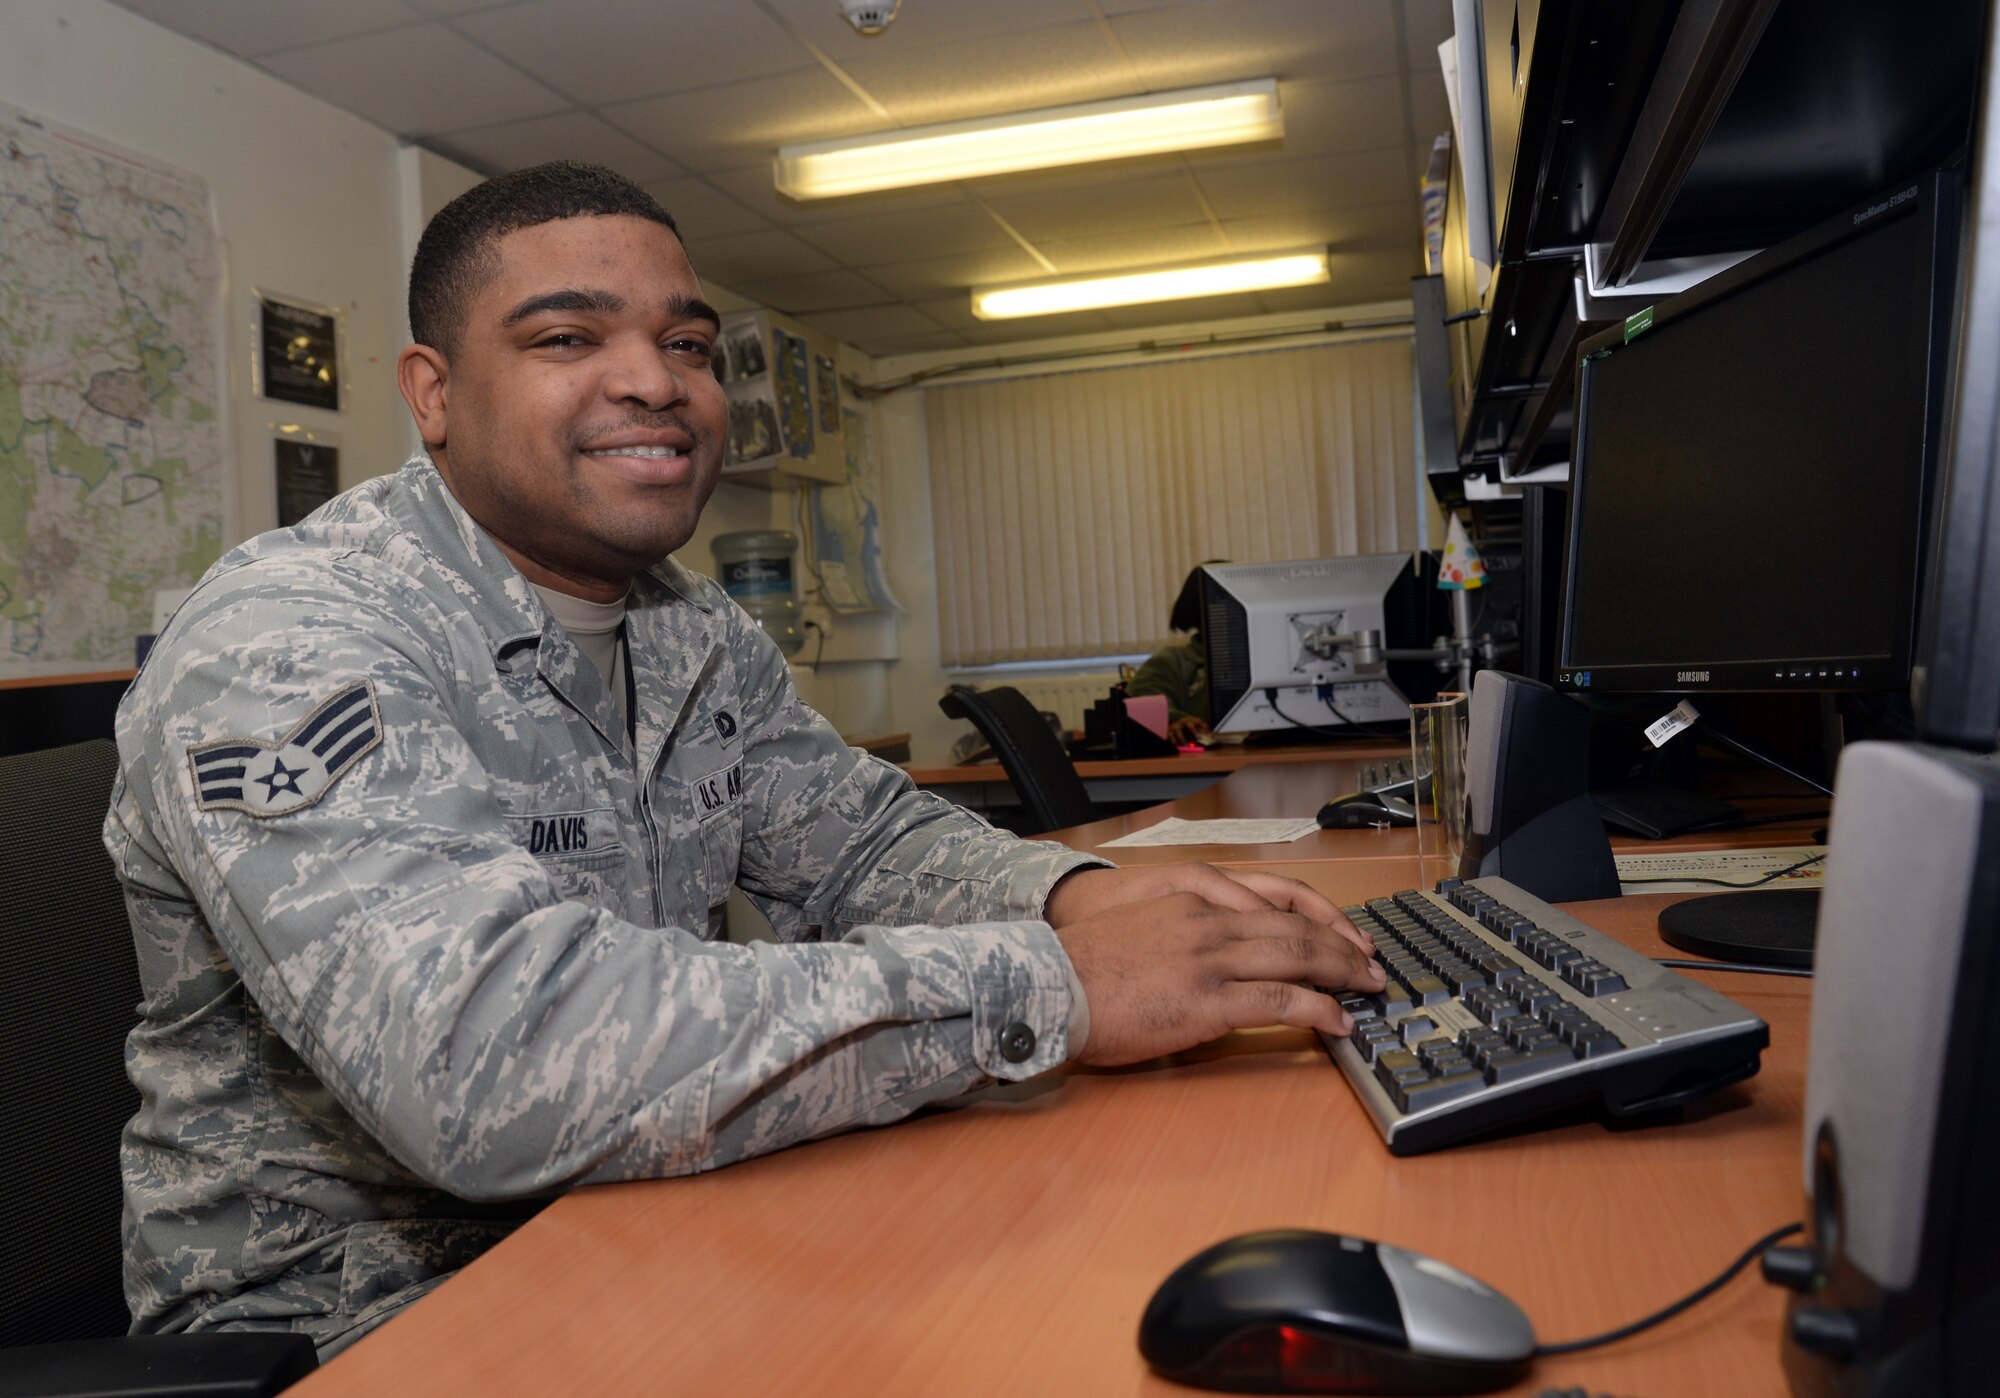 U.S. Air Force Senior Airman Anthony Davis, 352nd Special Operation Support Squadron Joint Air Operations controller, works at his desk, Jan. 13, 2015, on RAF Mildenhall, England. Davis was selected for the Square D Spotlight for portraying the core value of Excellence in All We Do. (U.S. Air Force photo by Senior Airman Christine Halan/Released)